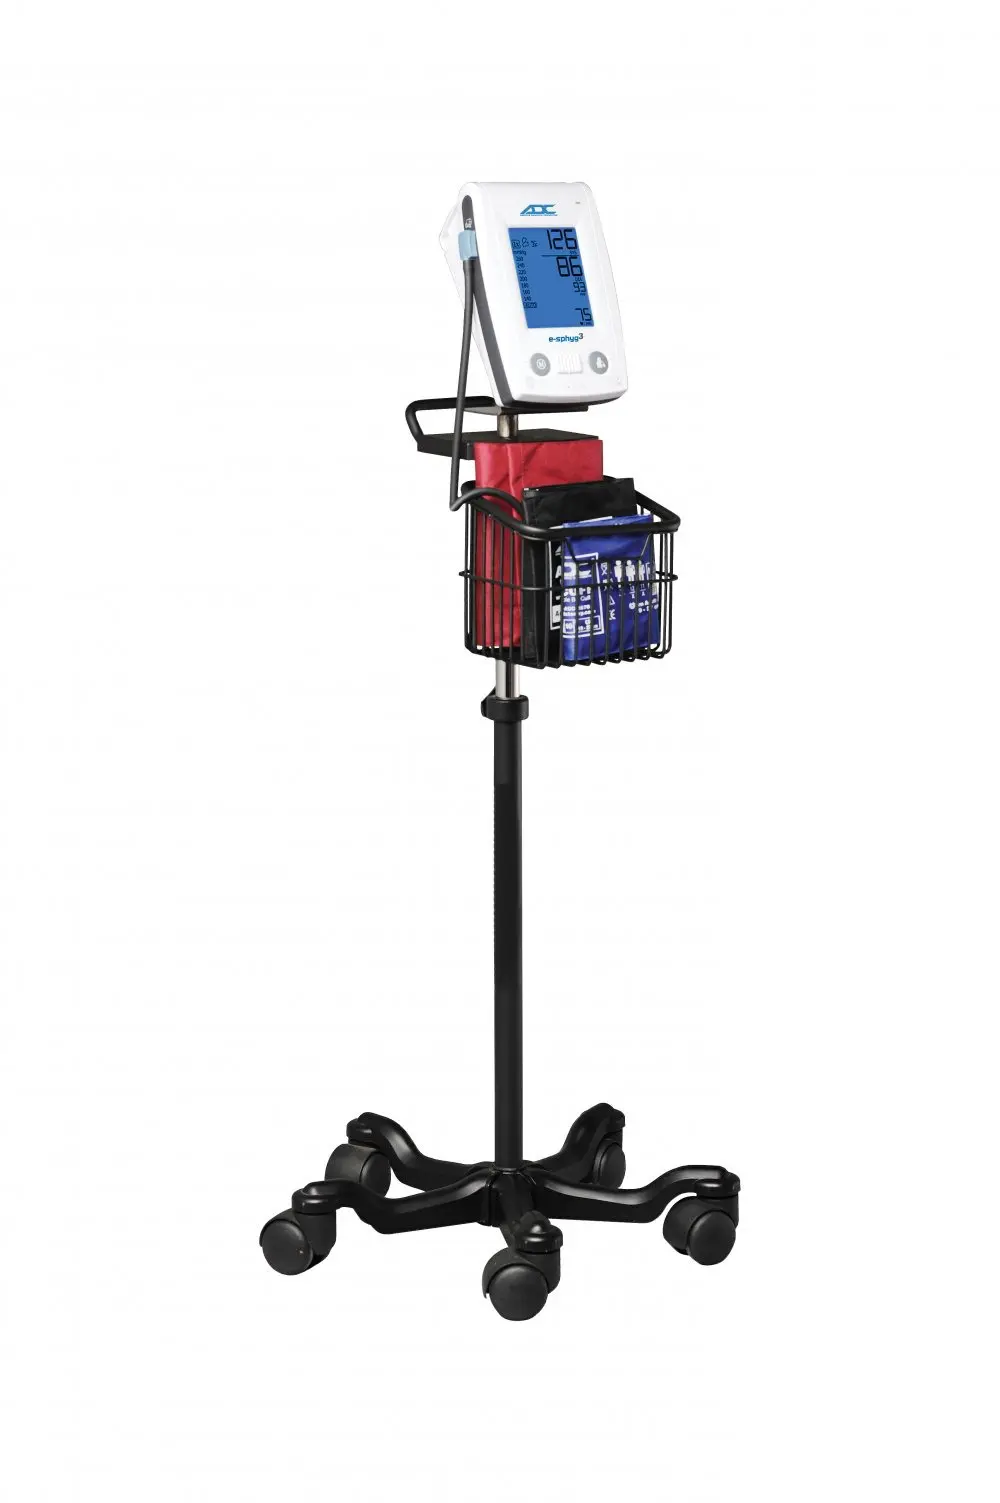 https://www.pelegrinamedical.com/Shared/Images/Product/ADC-9003K-MCC-e-sphyg-3-Digital-Blood-Pressure-Monitor-with-Mobile-Stand-Cuffs-and-Cuff-Basket/9003-stand.webp